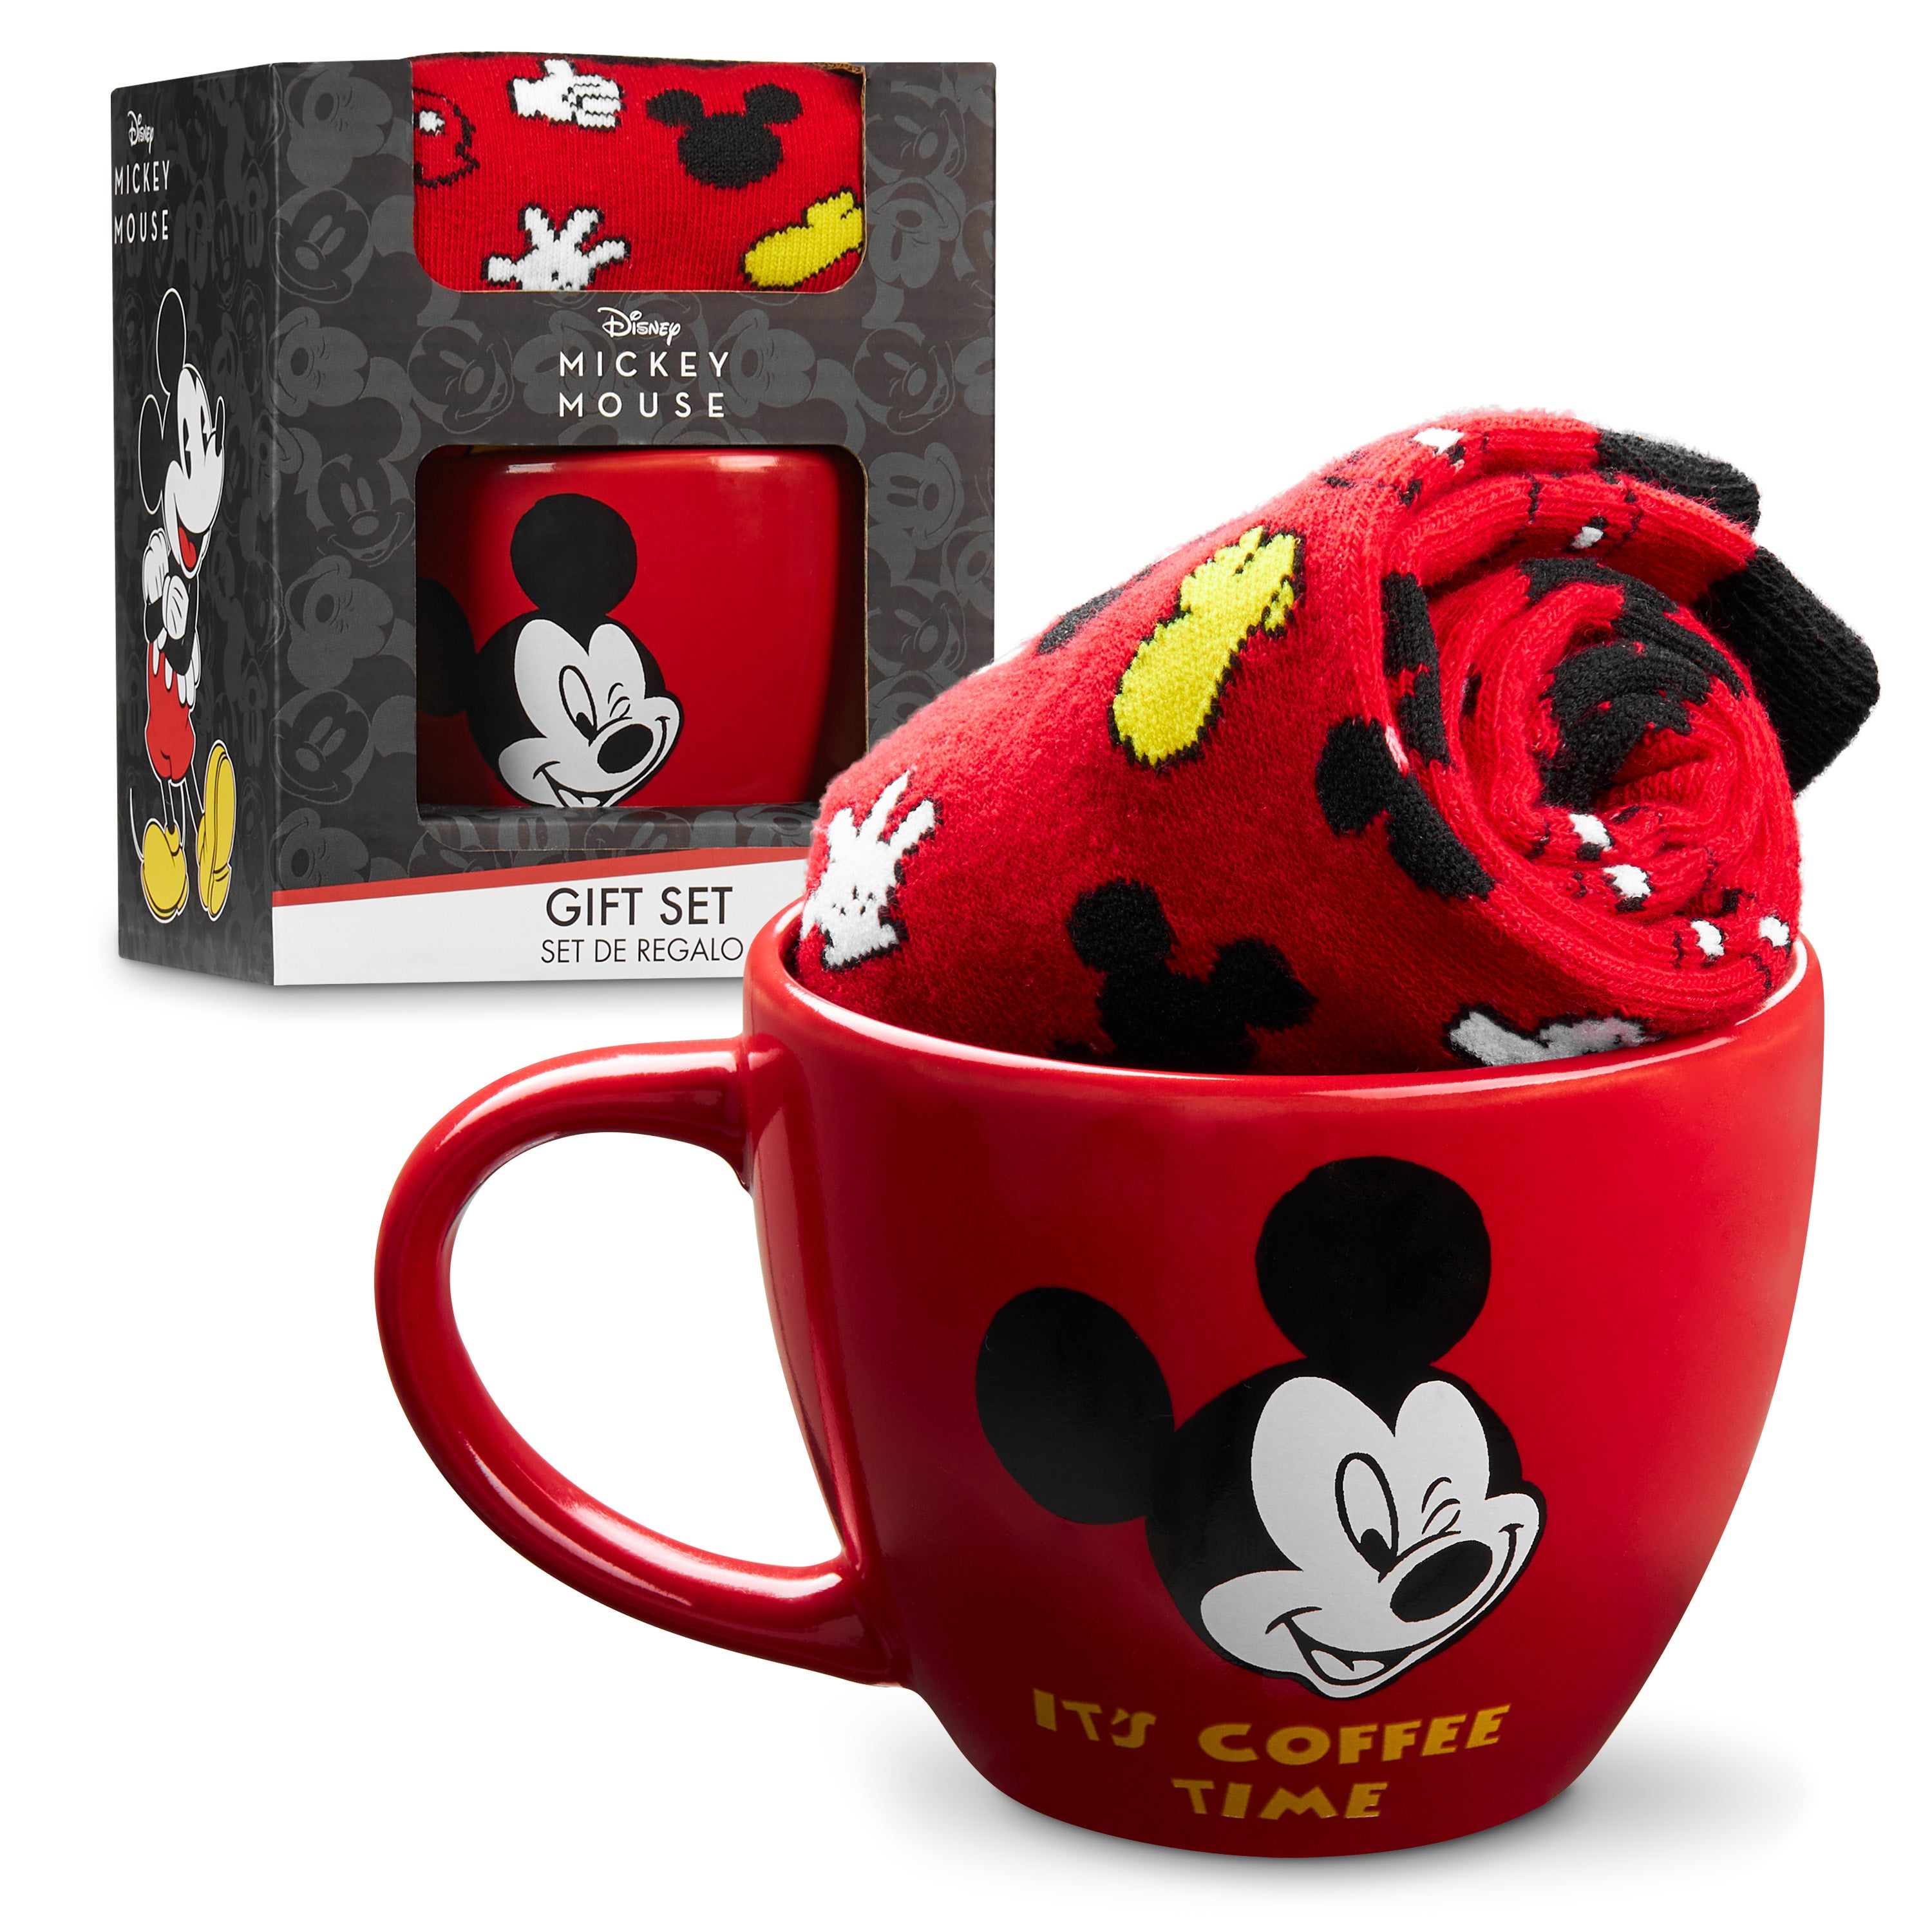 Disney Cup and Socks Gift Set Mickey Minnie Gifts for Women, Red - Mic